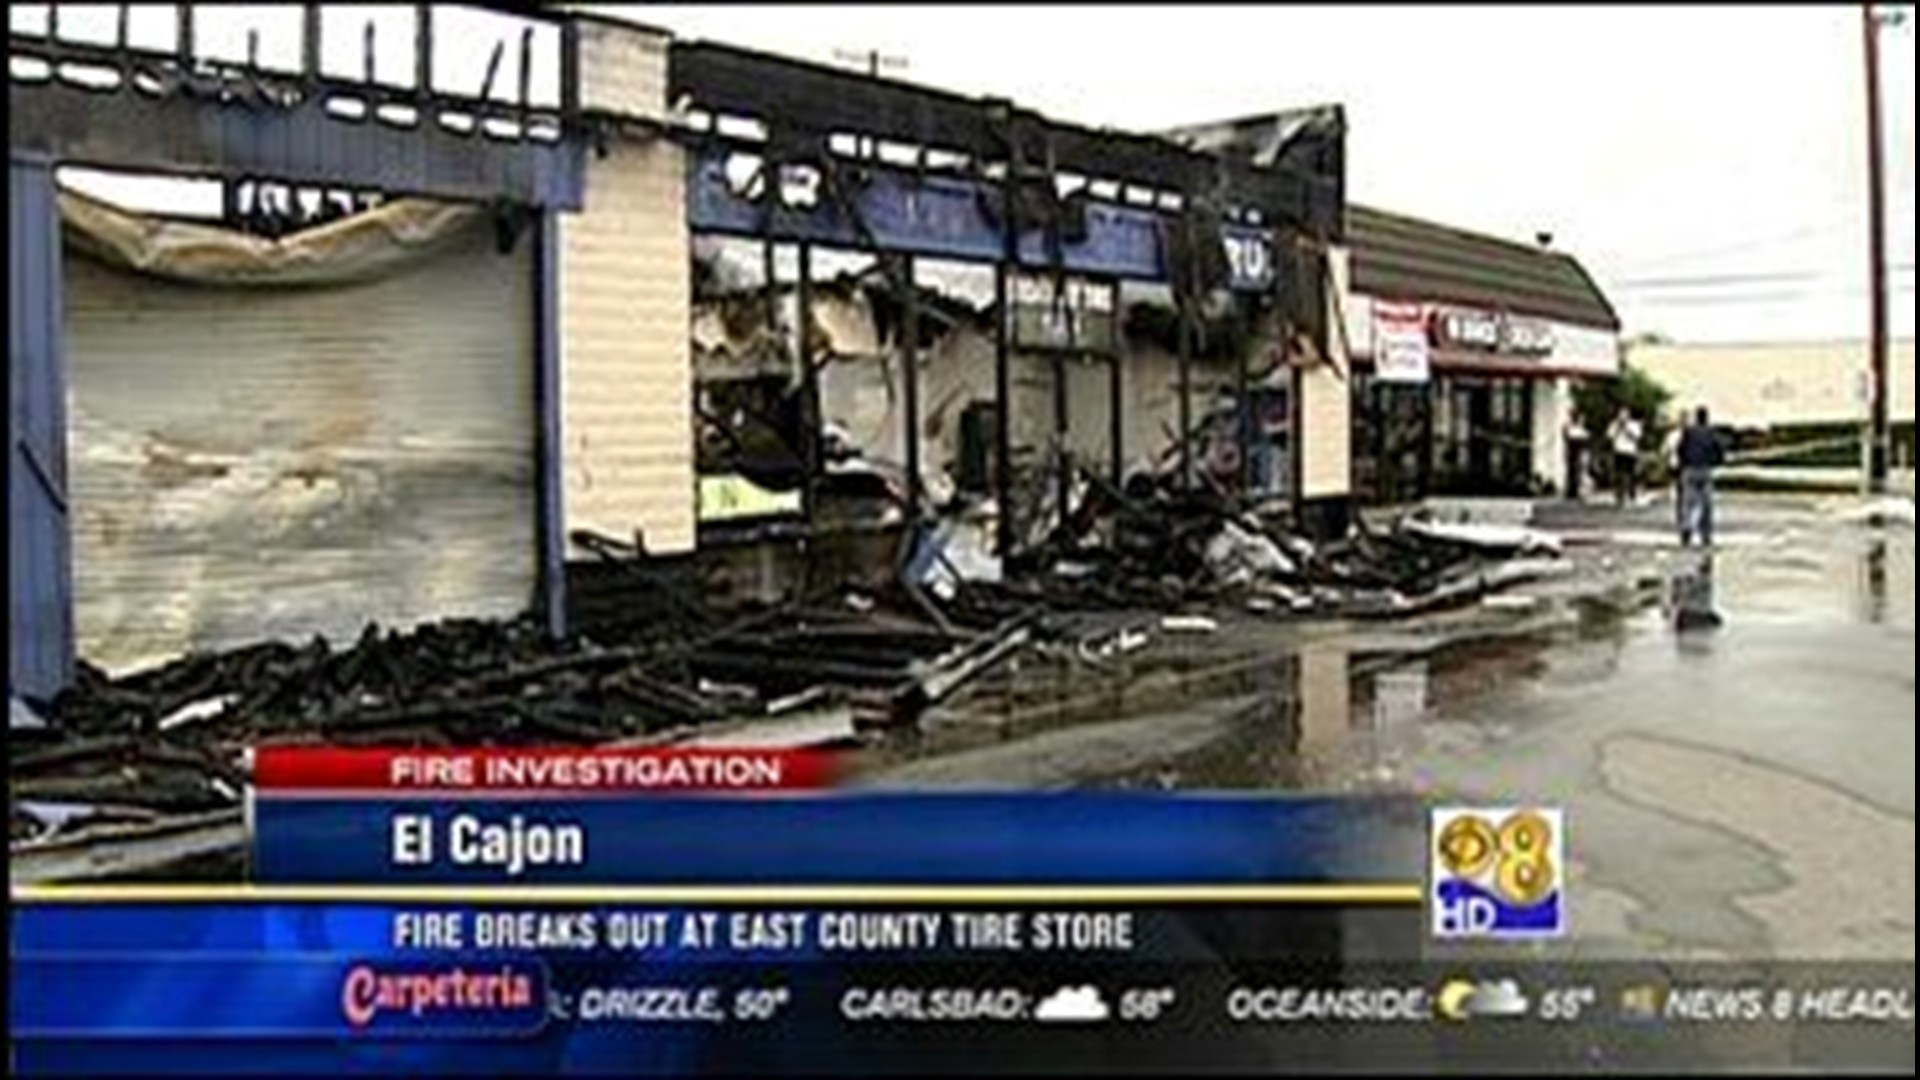 El Cajon Auto Shop Helps Workers Displaced by Fire - 42aeca43 022D 4f30 Aa4c 2256a18a9D24 1920x1080